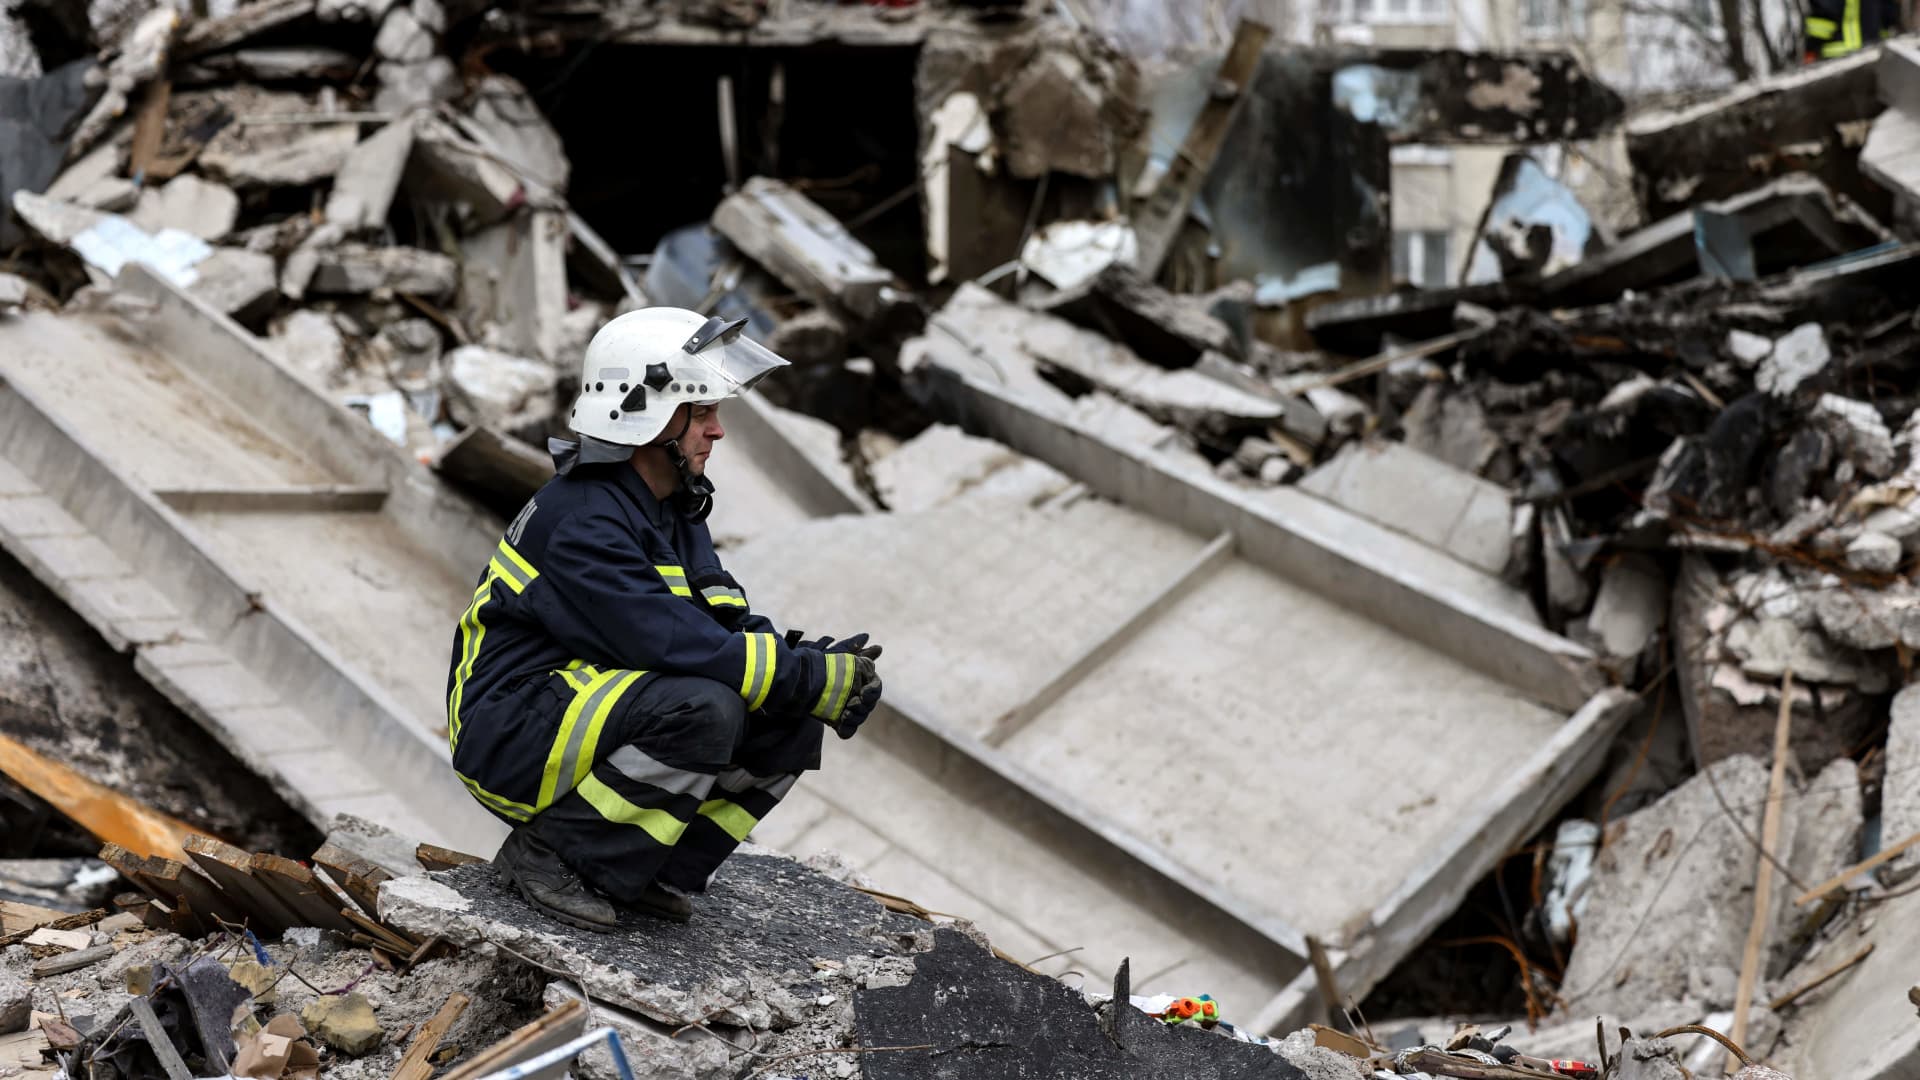 Ukrainian firefighters search for bodies in the rubble of destroyed buildings in the town of Borodianka, northwest of Kyiv, on April 8, 2022.